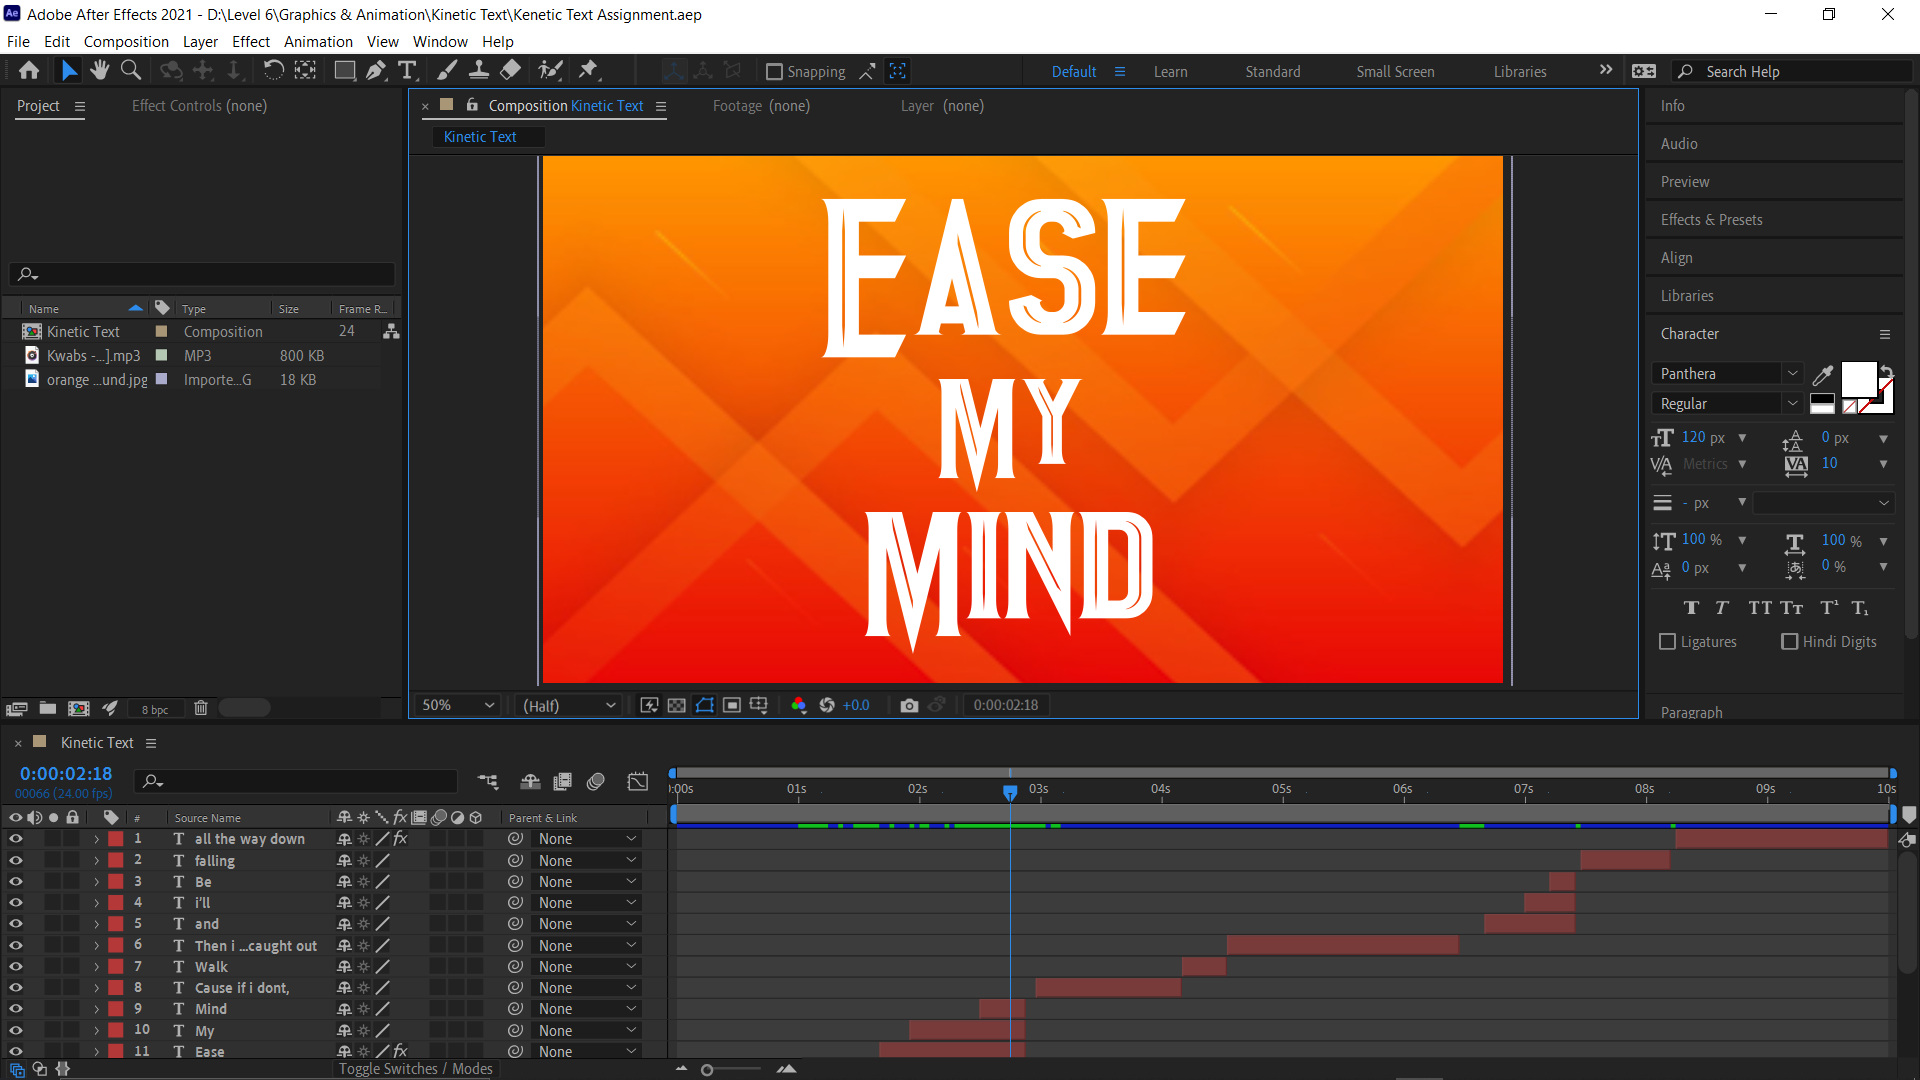 After effects